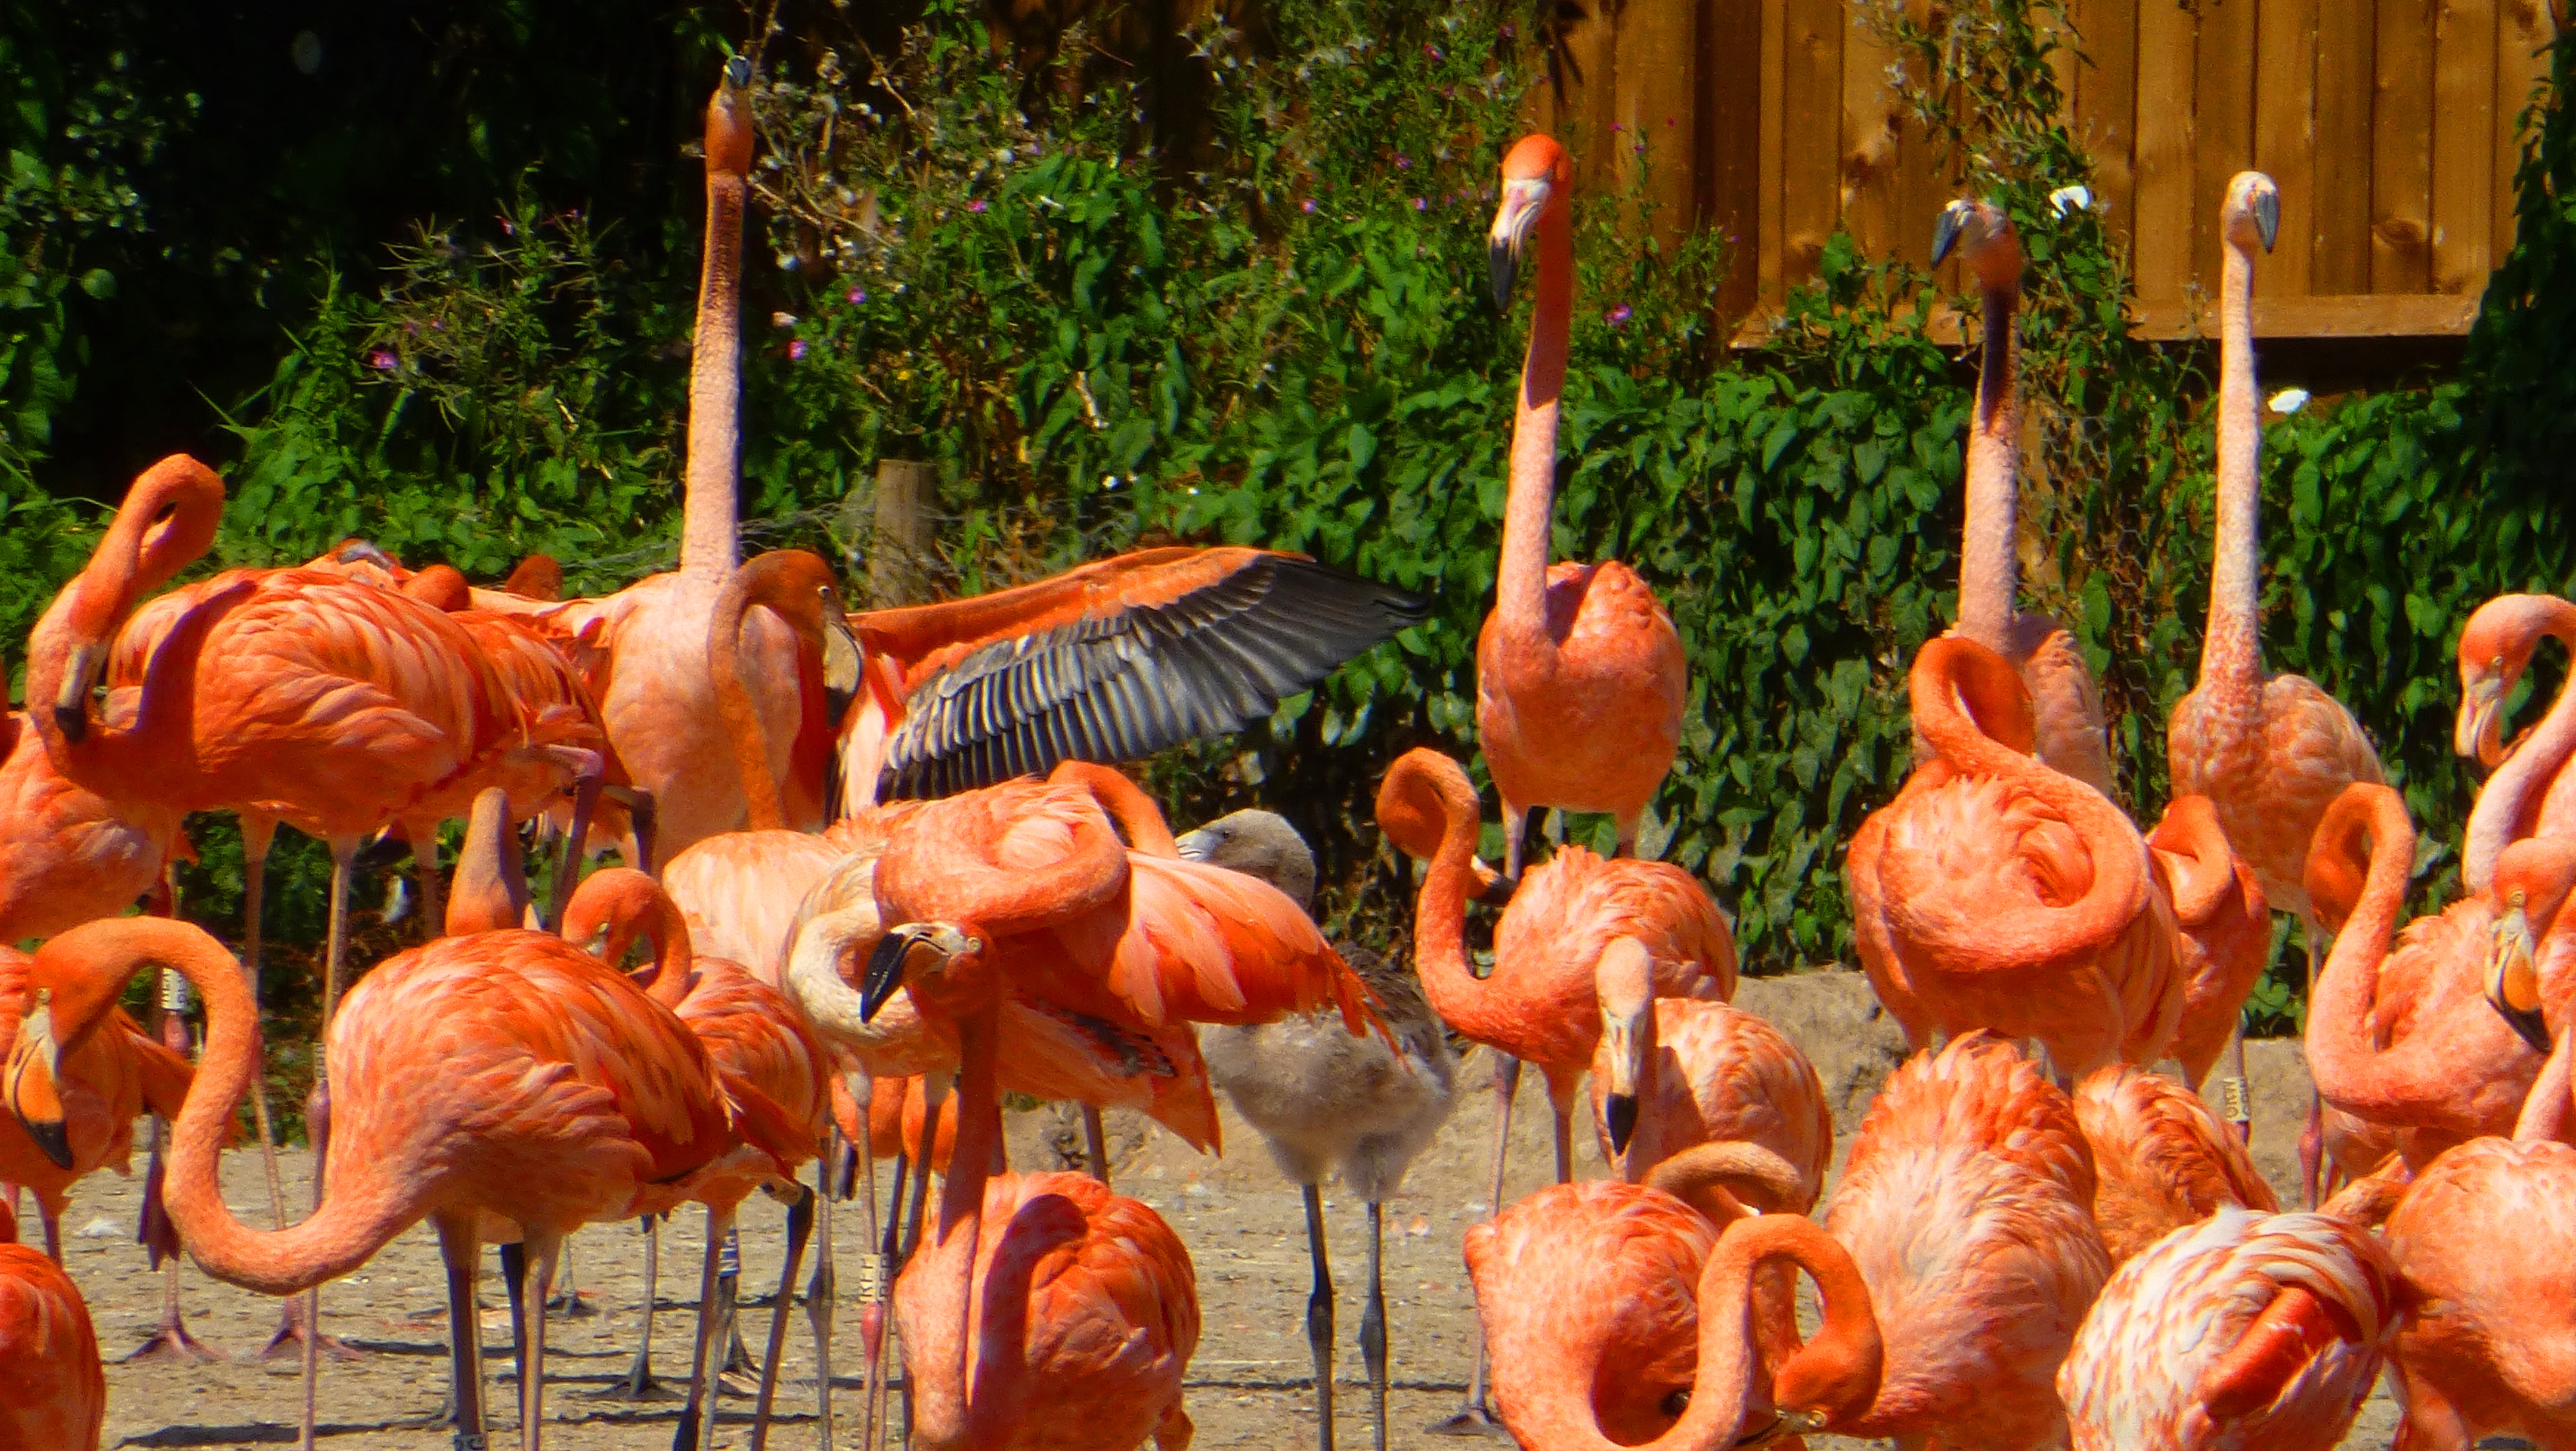 Who wants to dance?! Caribbean flamingos that haven't bred this year start to think about their courtship routines for next year's nesting season. Early bird gets the worm and all that...